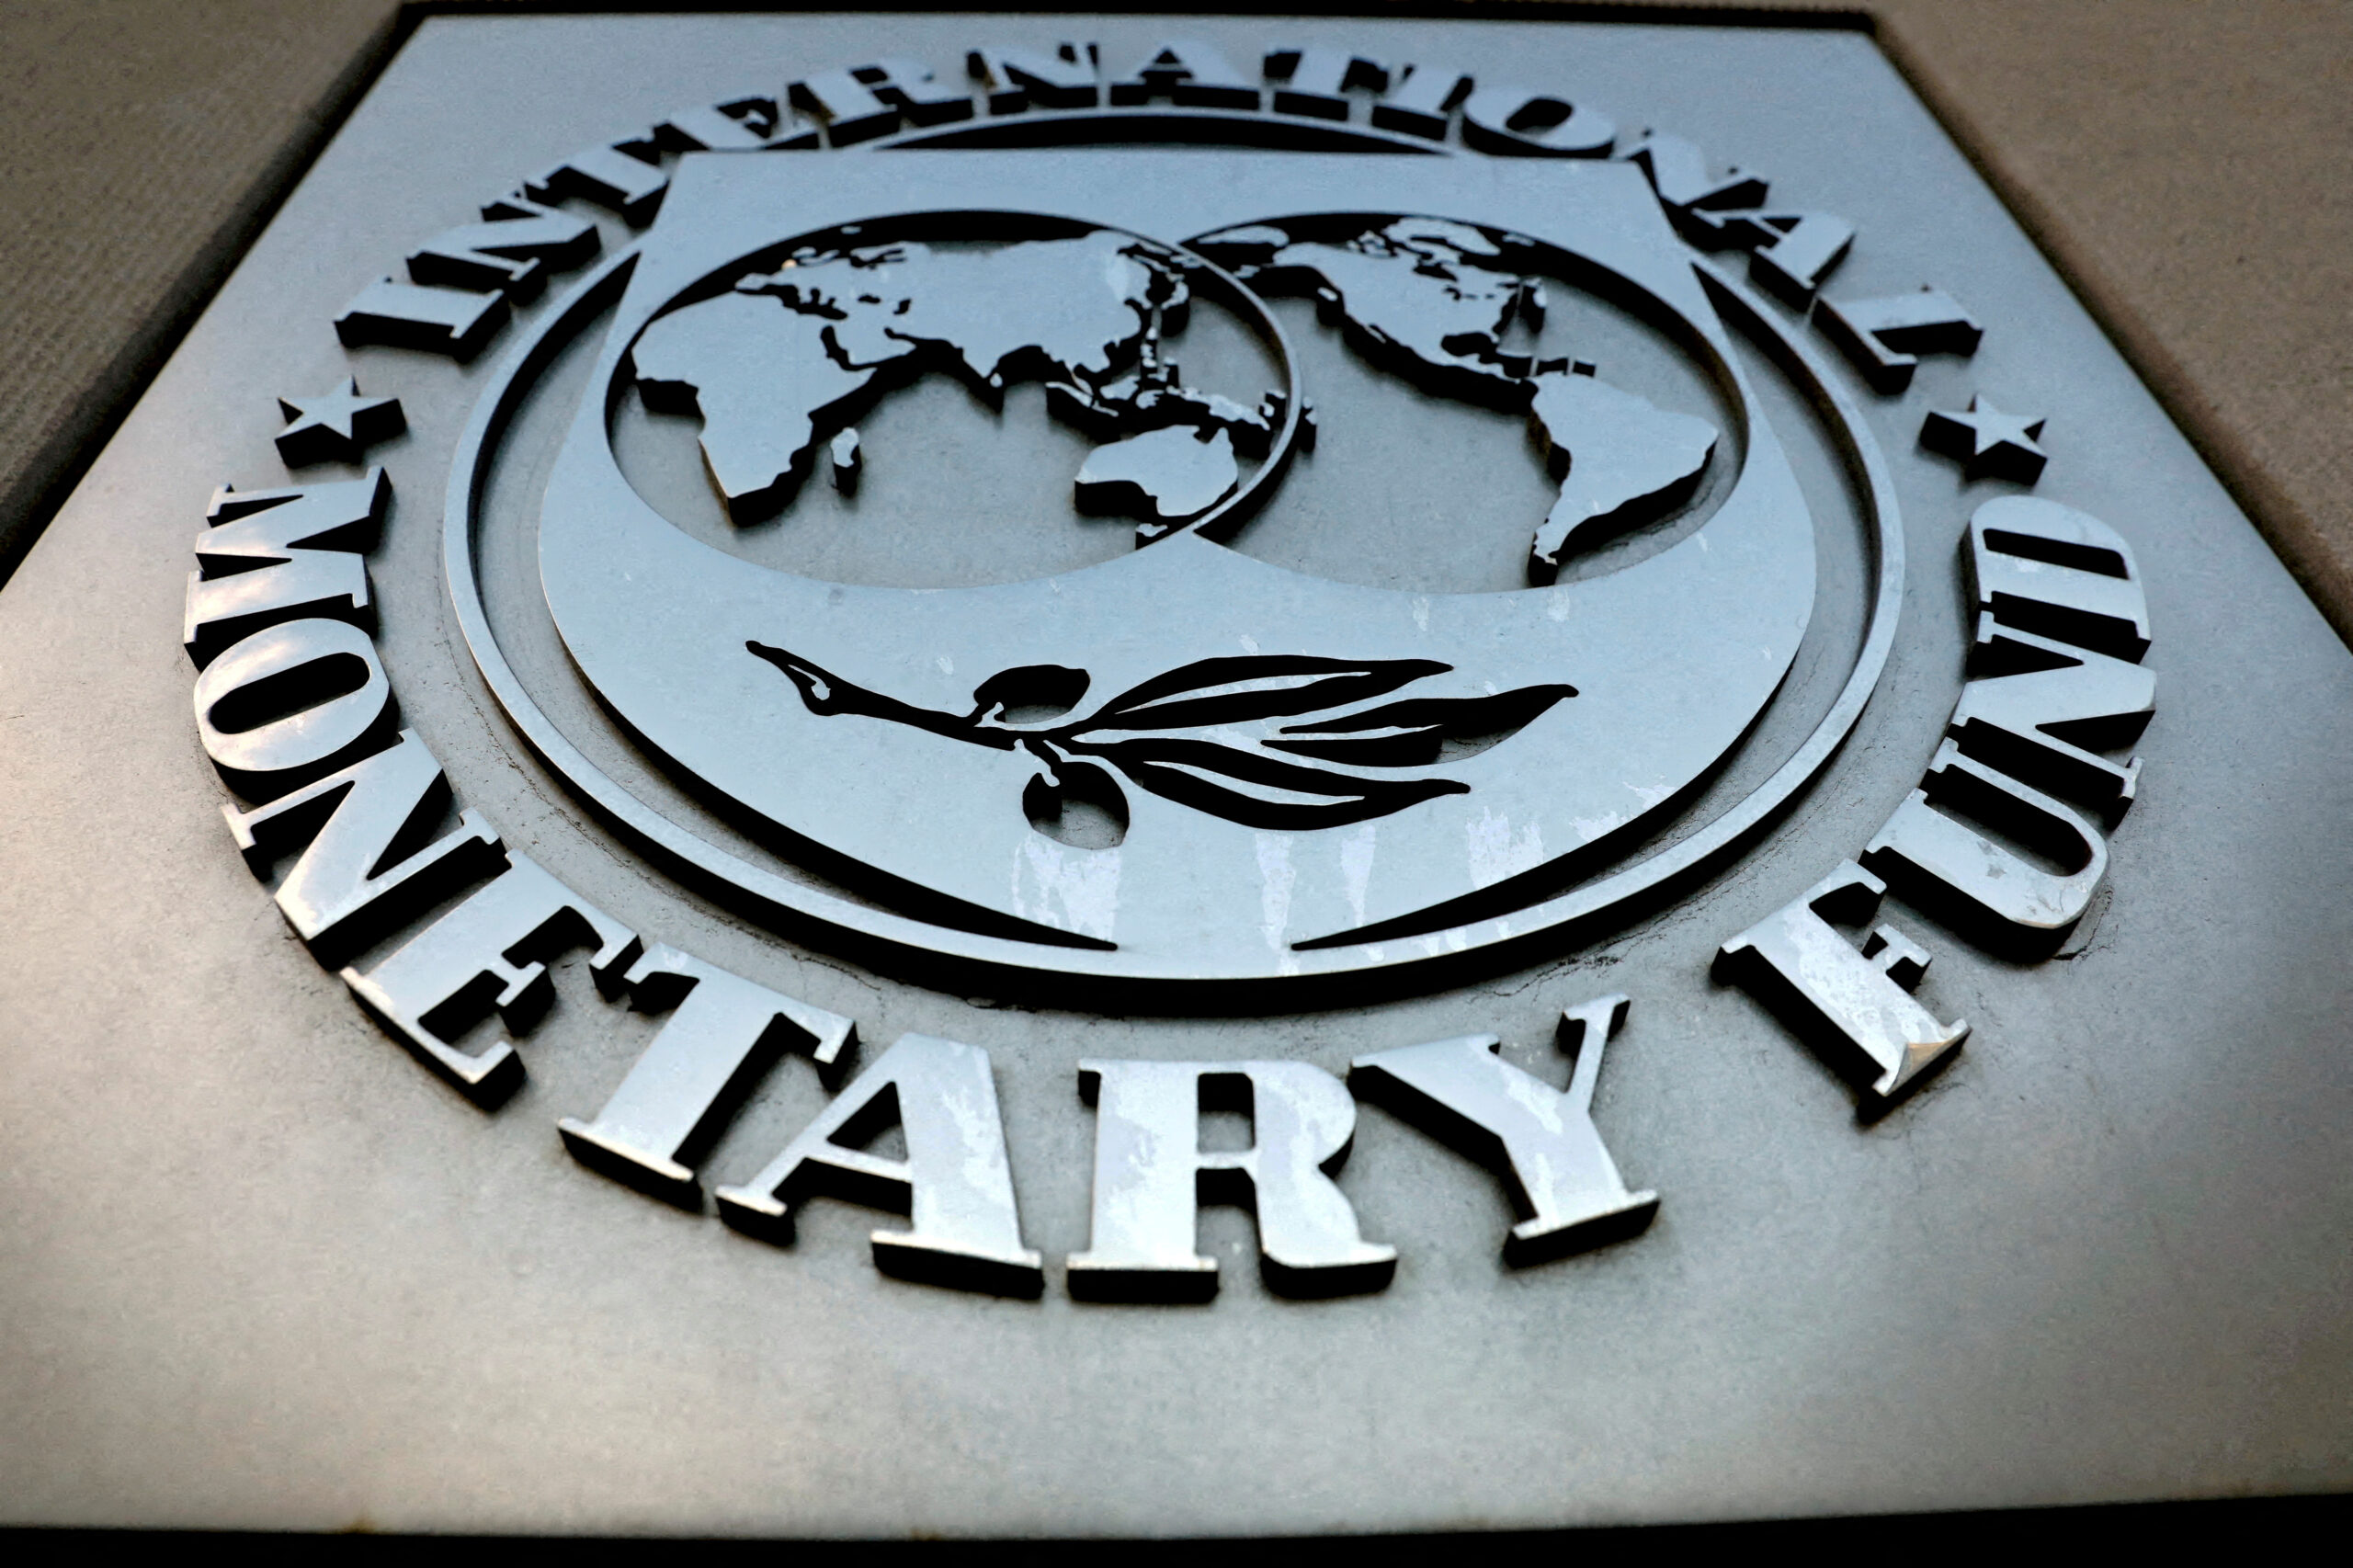 IMF praises Argentina’s austerity, warns path to stability ‘challenging’